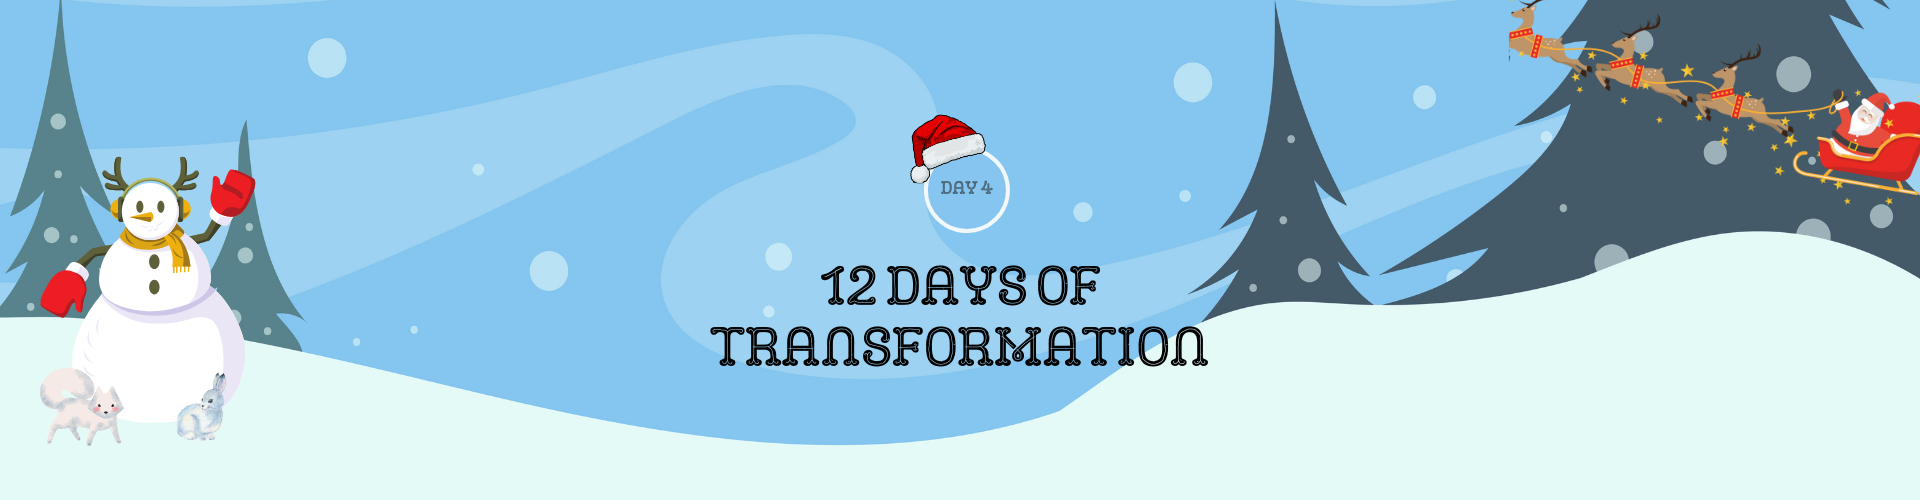 12 Days of Transformation Blog Banner | Festive winter holidays-themed banner with a cheerful snowman and Santa Claus riding his sleigh | Day 4